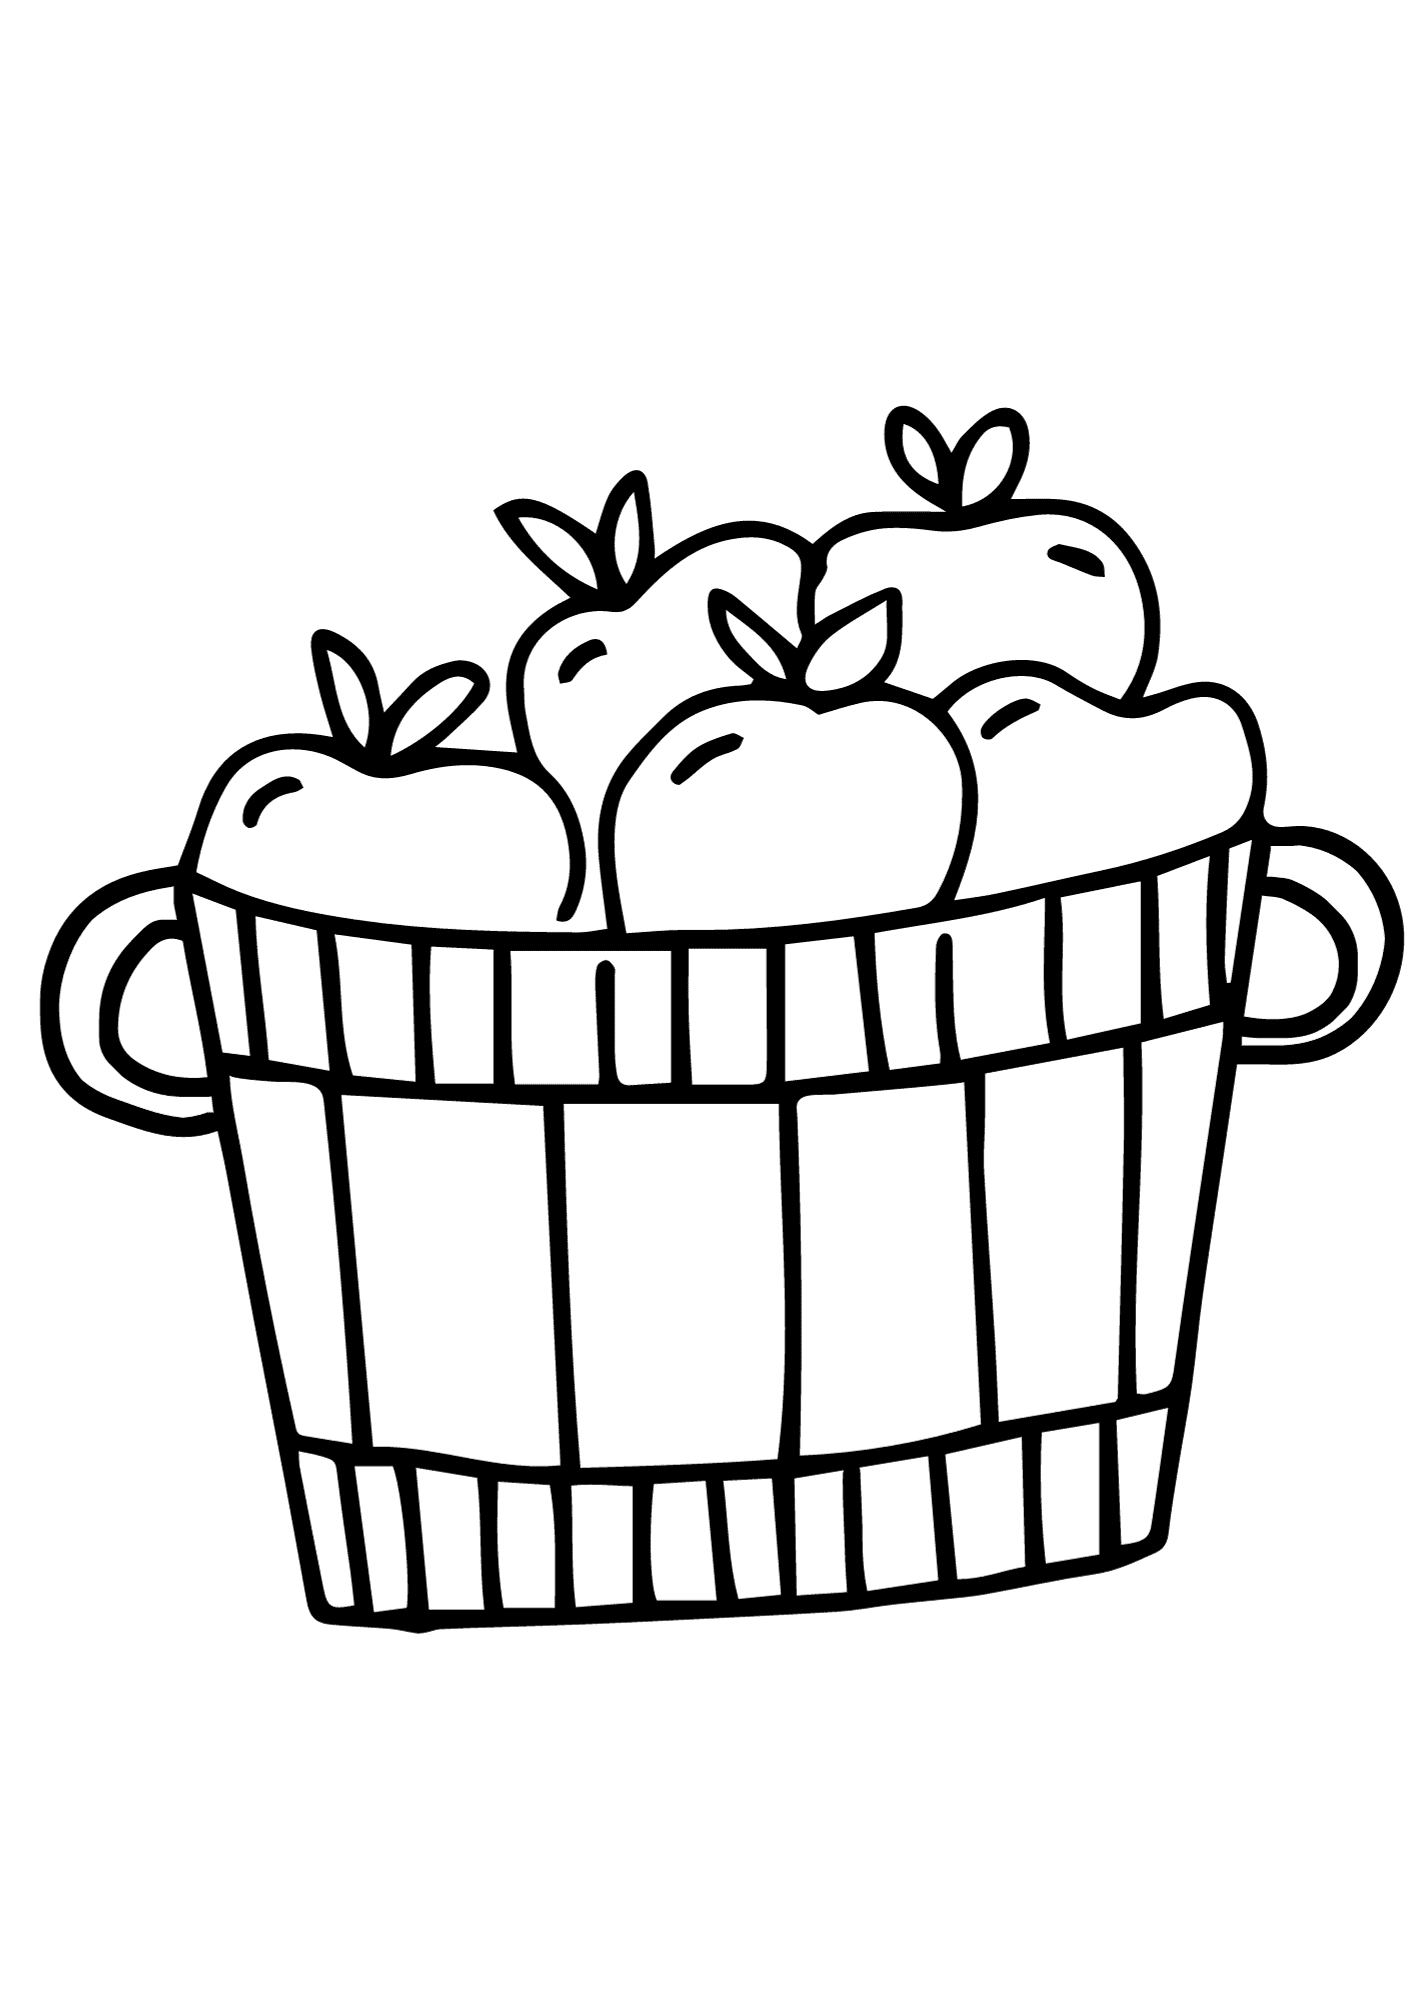 Apples Painting Coloring Pages